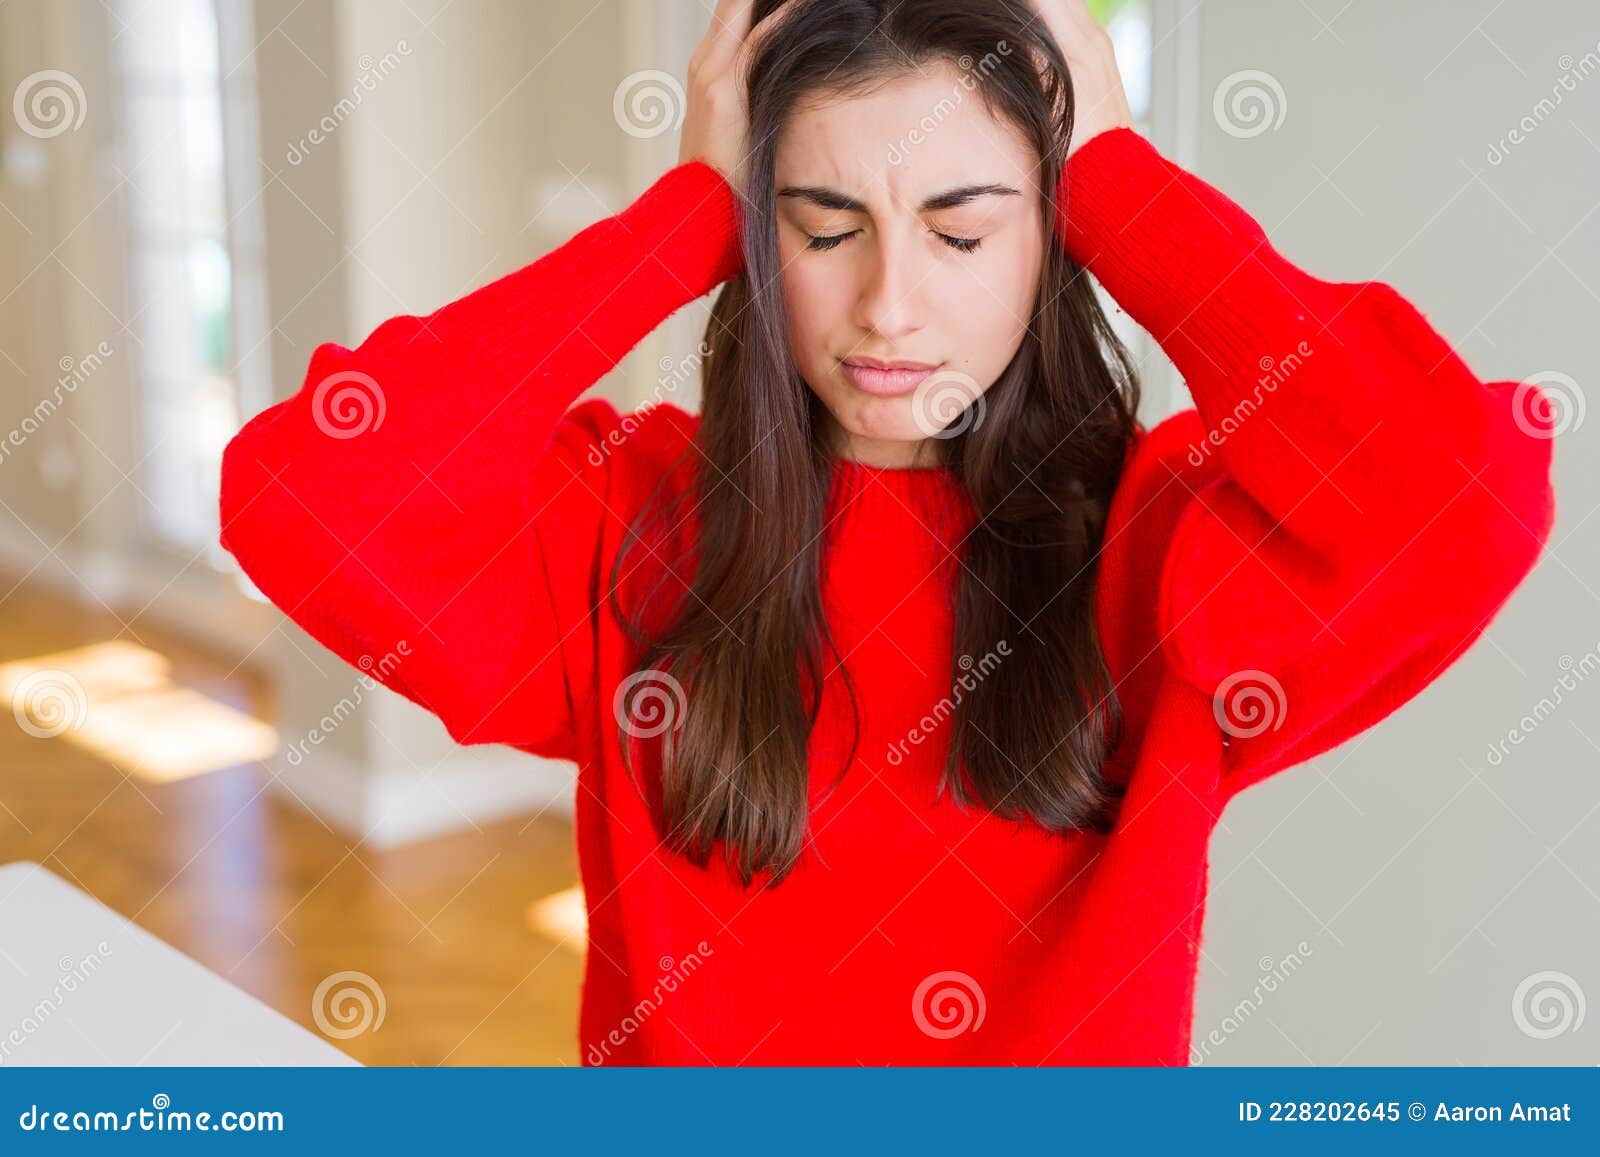 Beautiful Young Woman Wearing Casual Red Sweater Suffering from ...